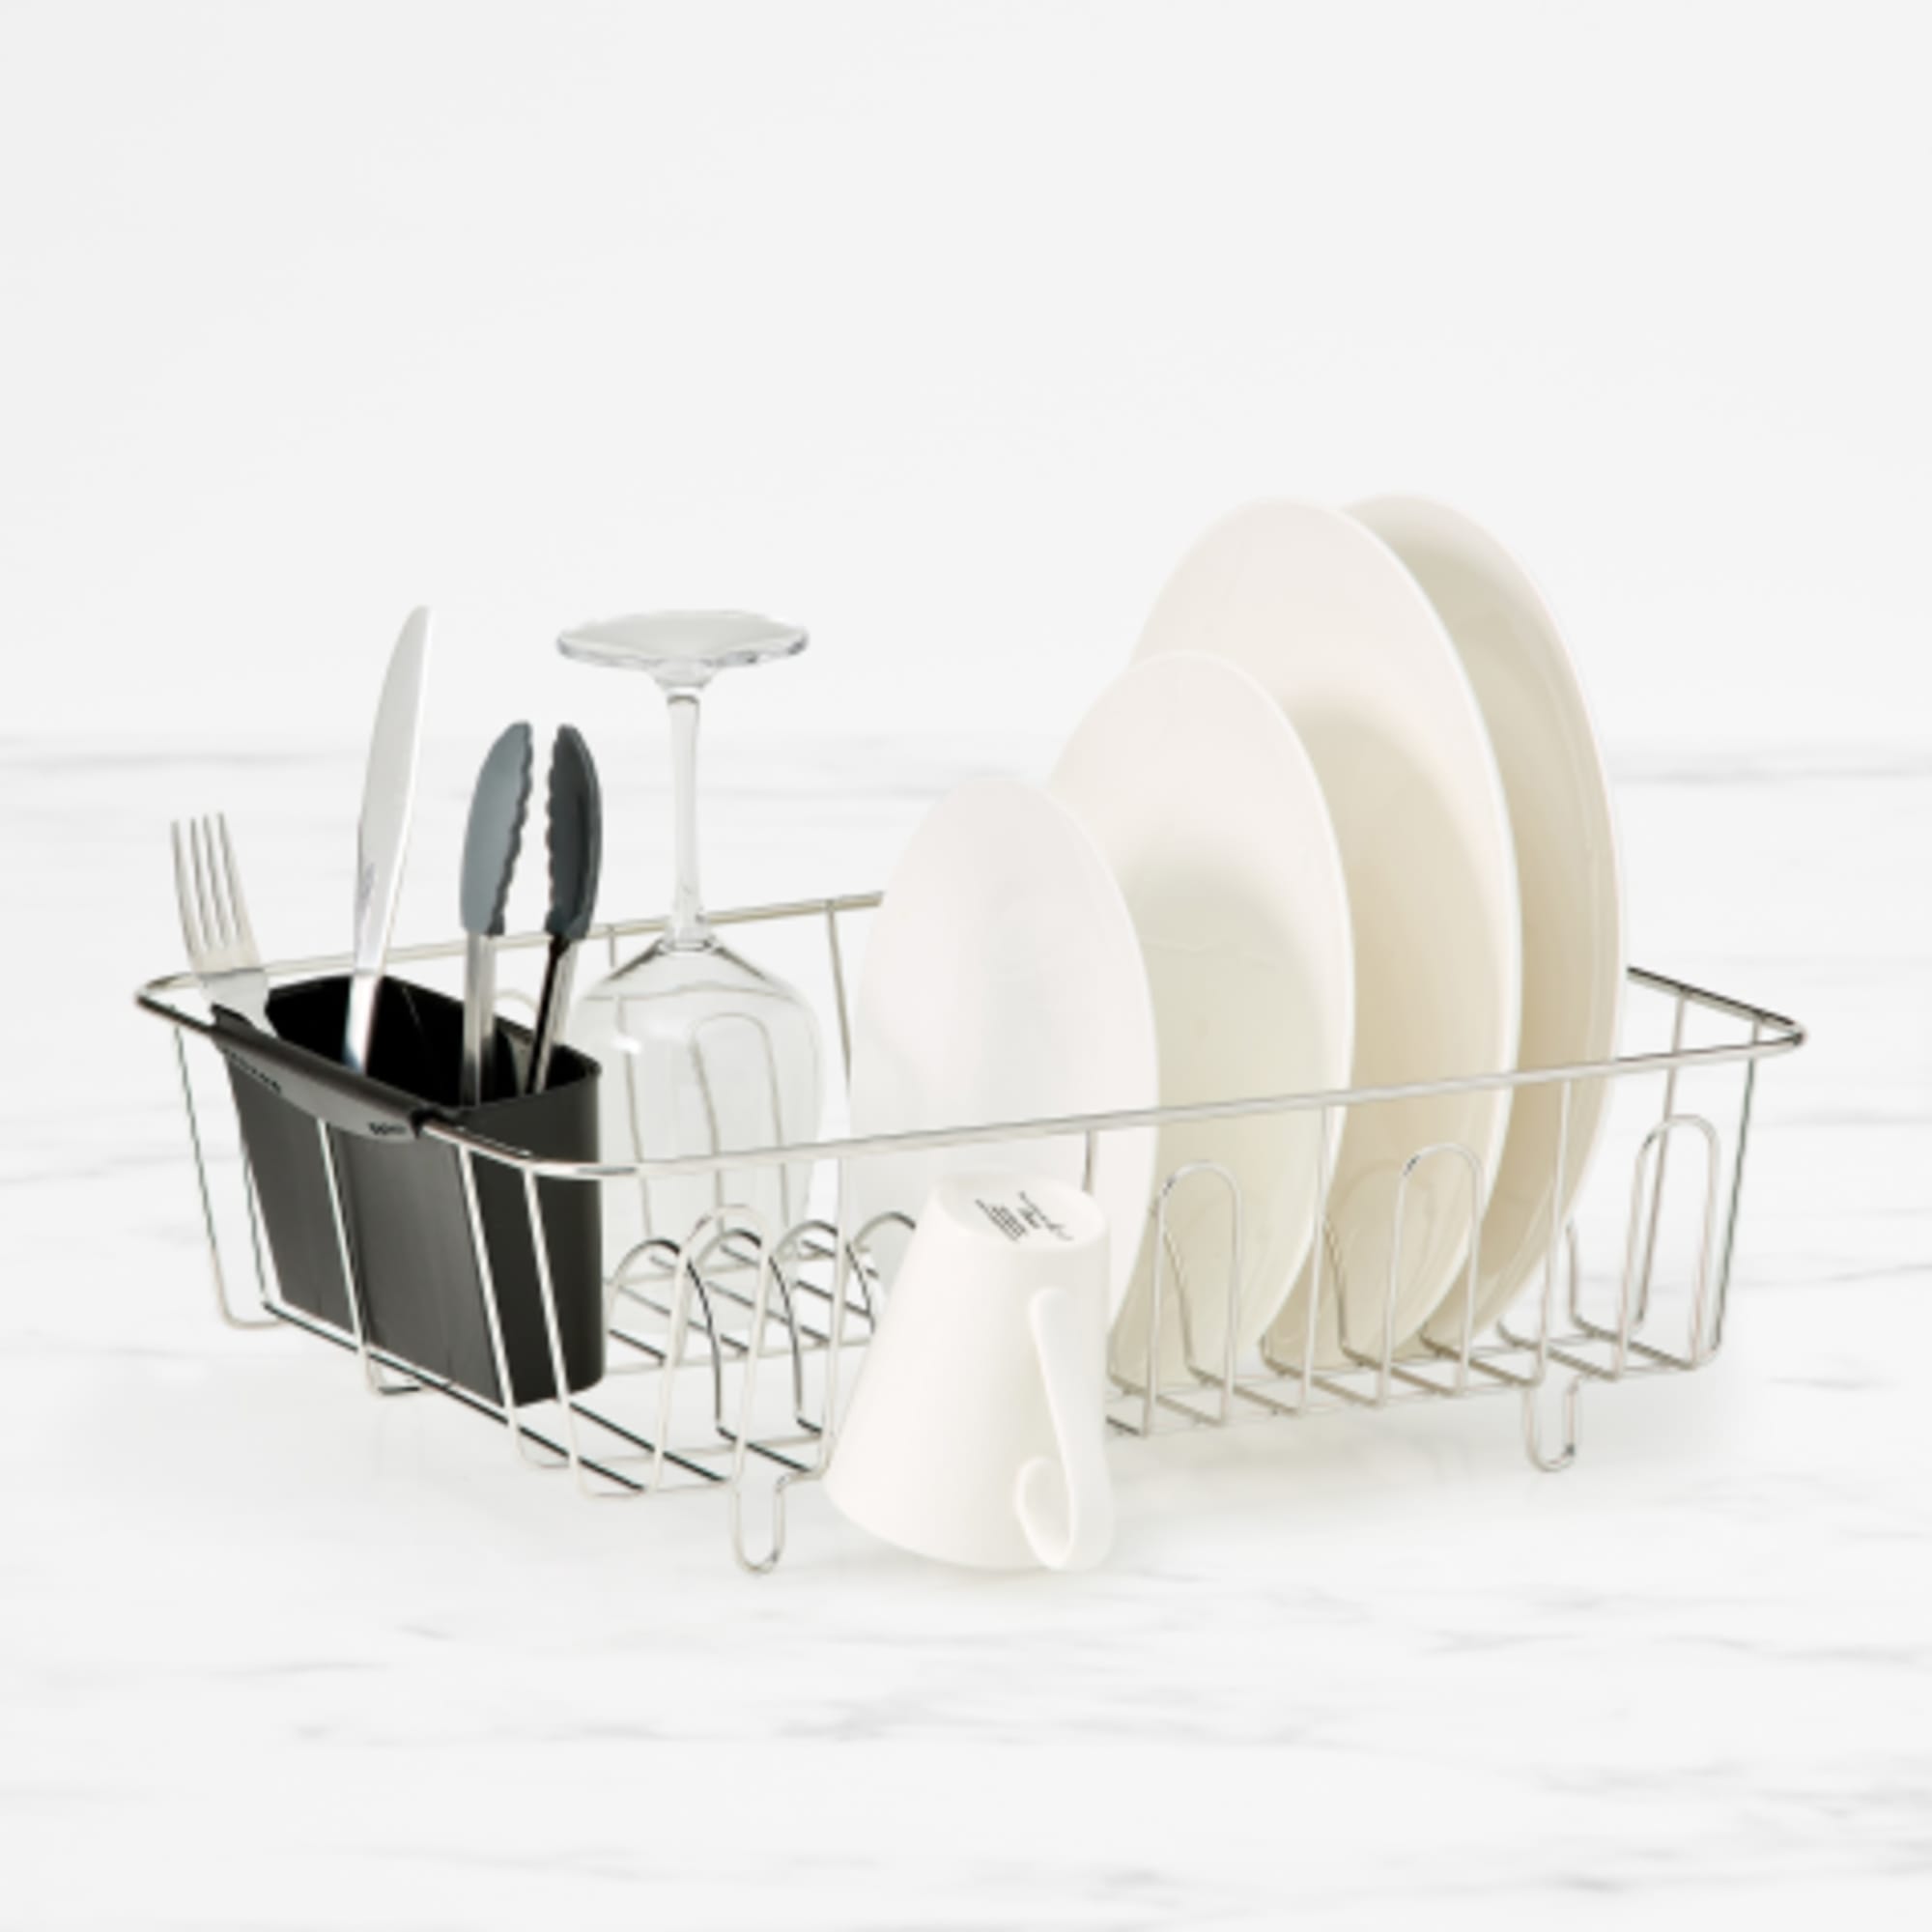 https://res.cloudinary.com/kitchenwarehouse/image/upload/c_fill,g_face,w_475/f_auto/t_PDP_2000x2000/Kitchen%20Warehouse%20Images%20/Kitchen-Pro-Tidy-Stainless-Steel-Dish-Rack_1.jpg